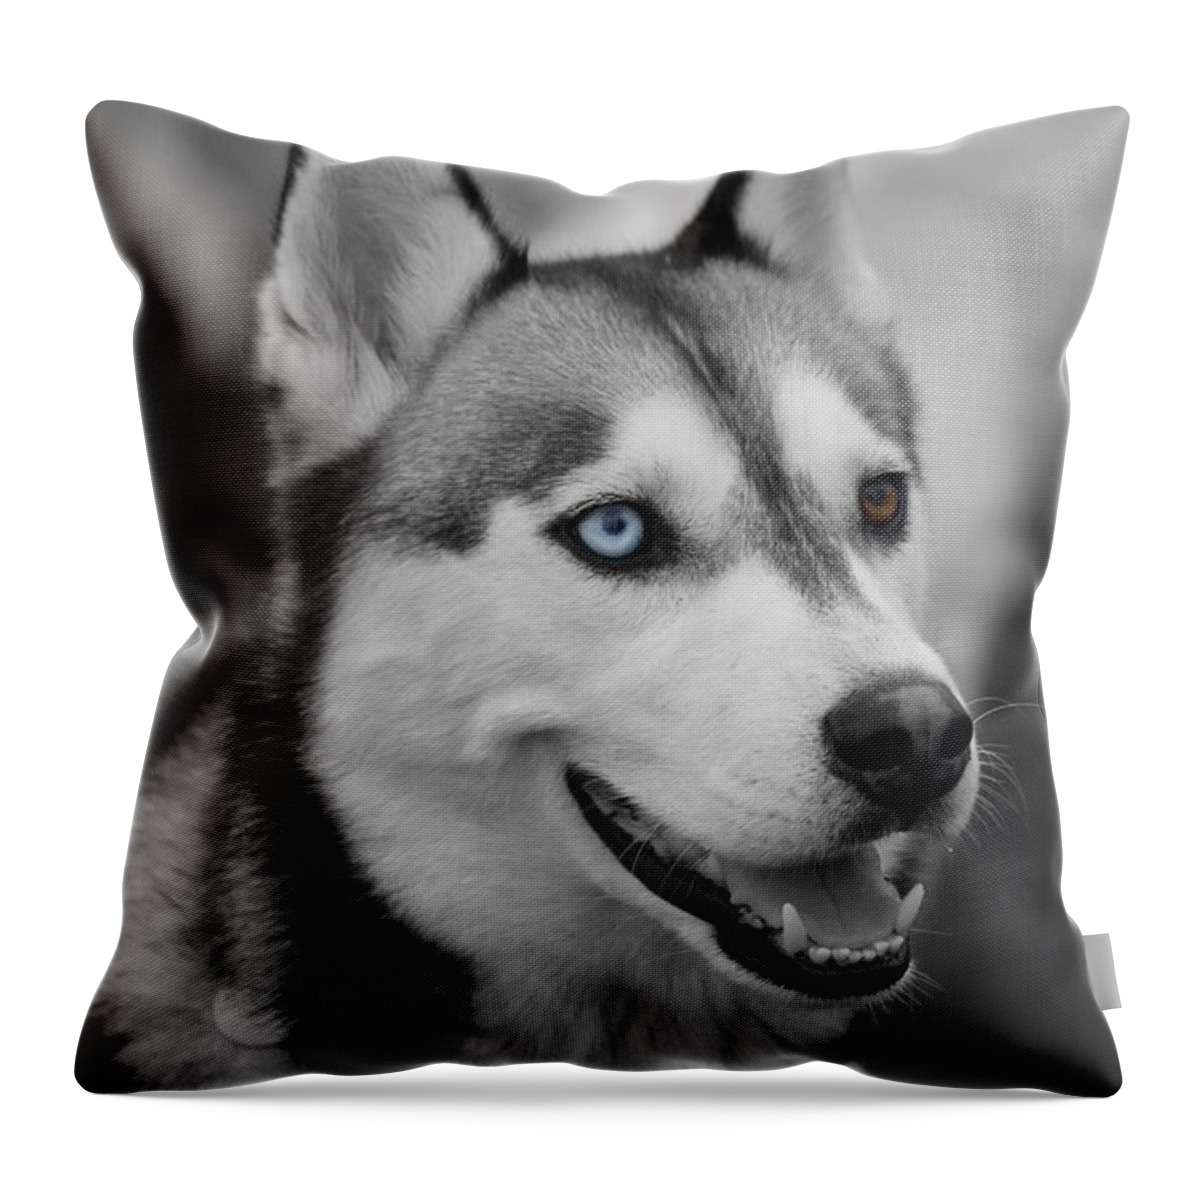 Husky Throw Pillow featuring the photograph Husky Portrait by Vicki Spindler